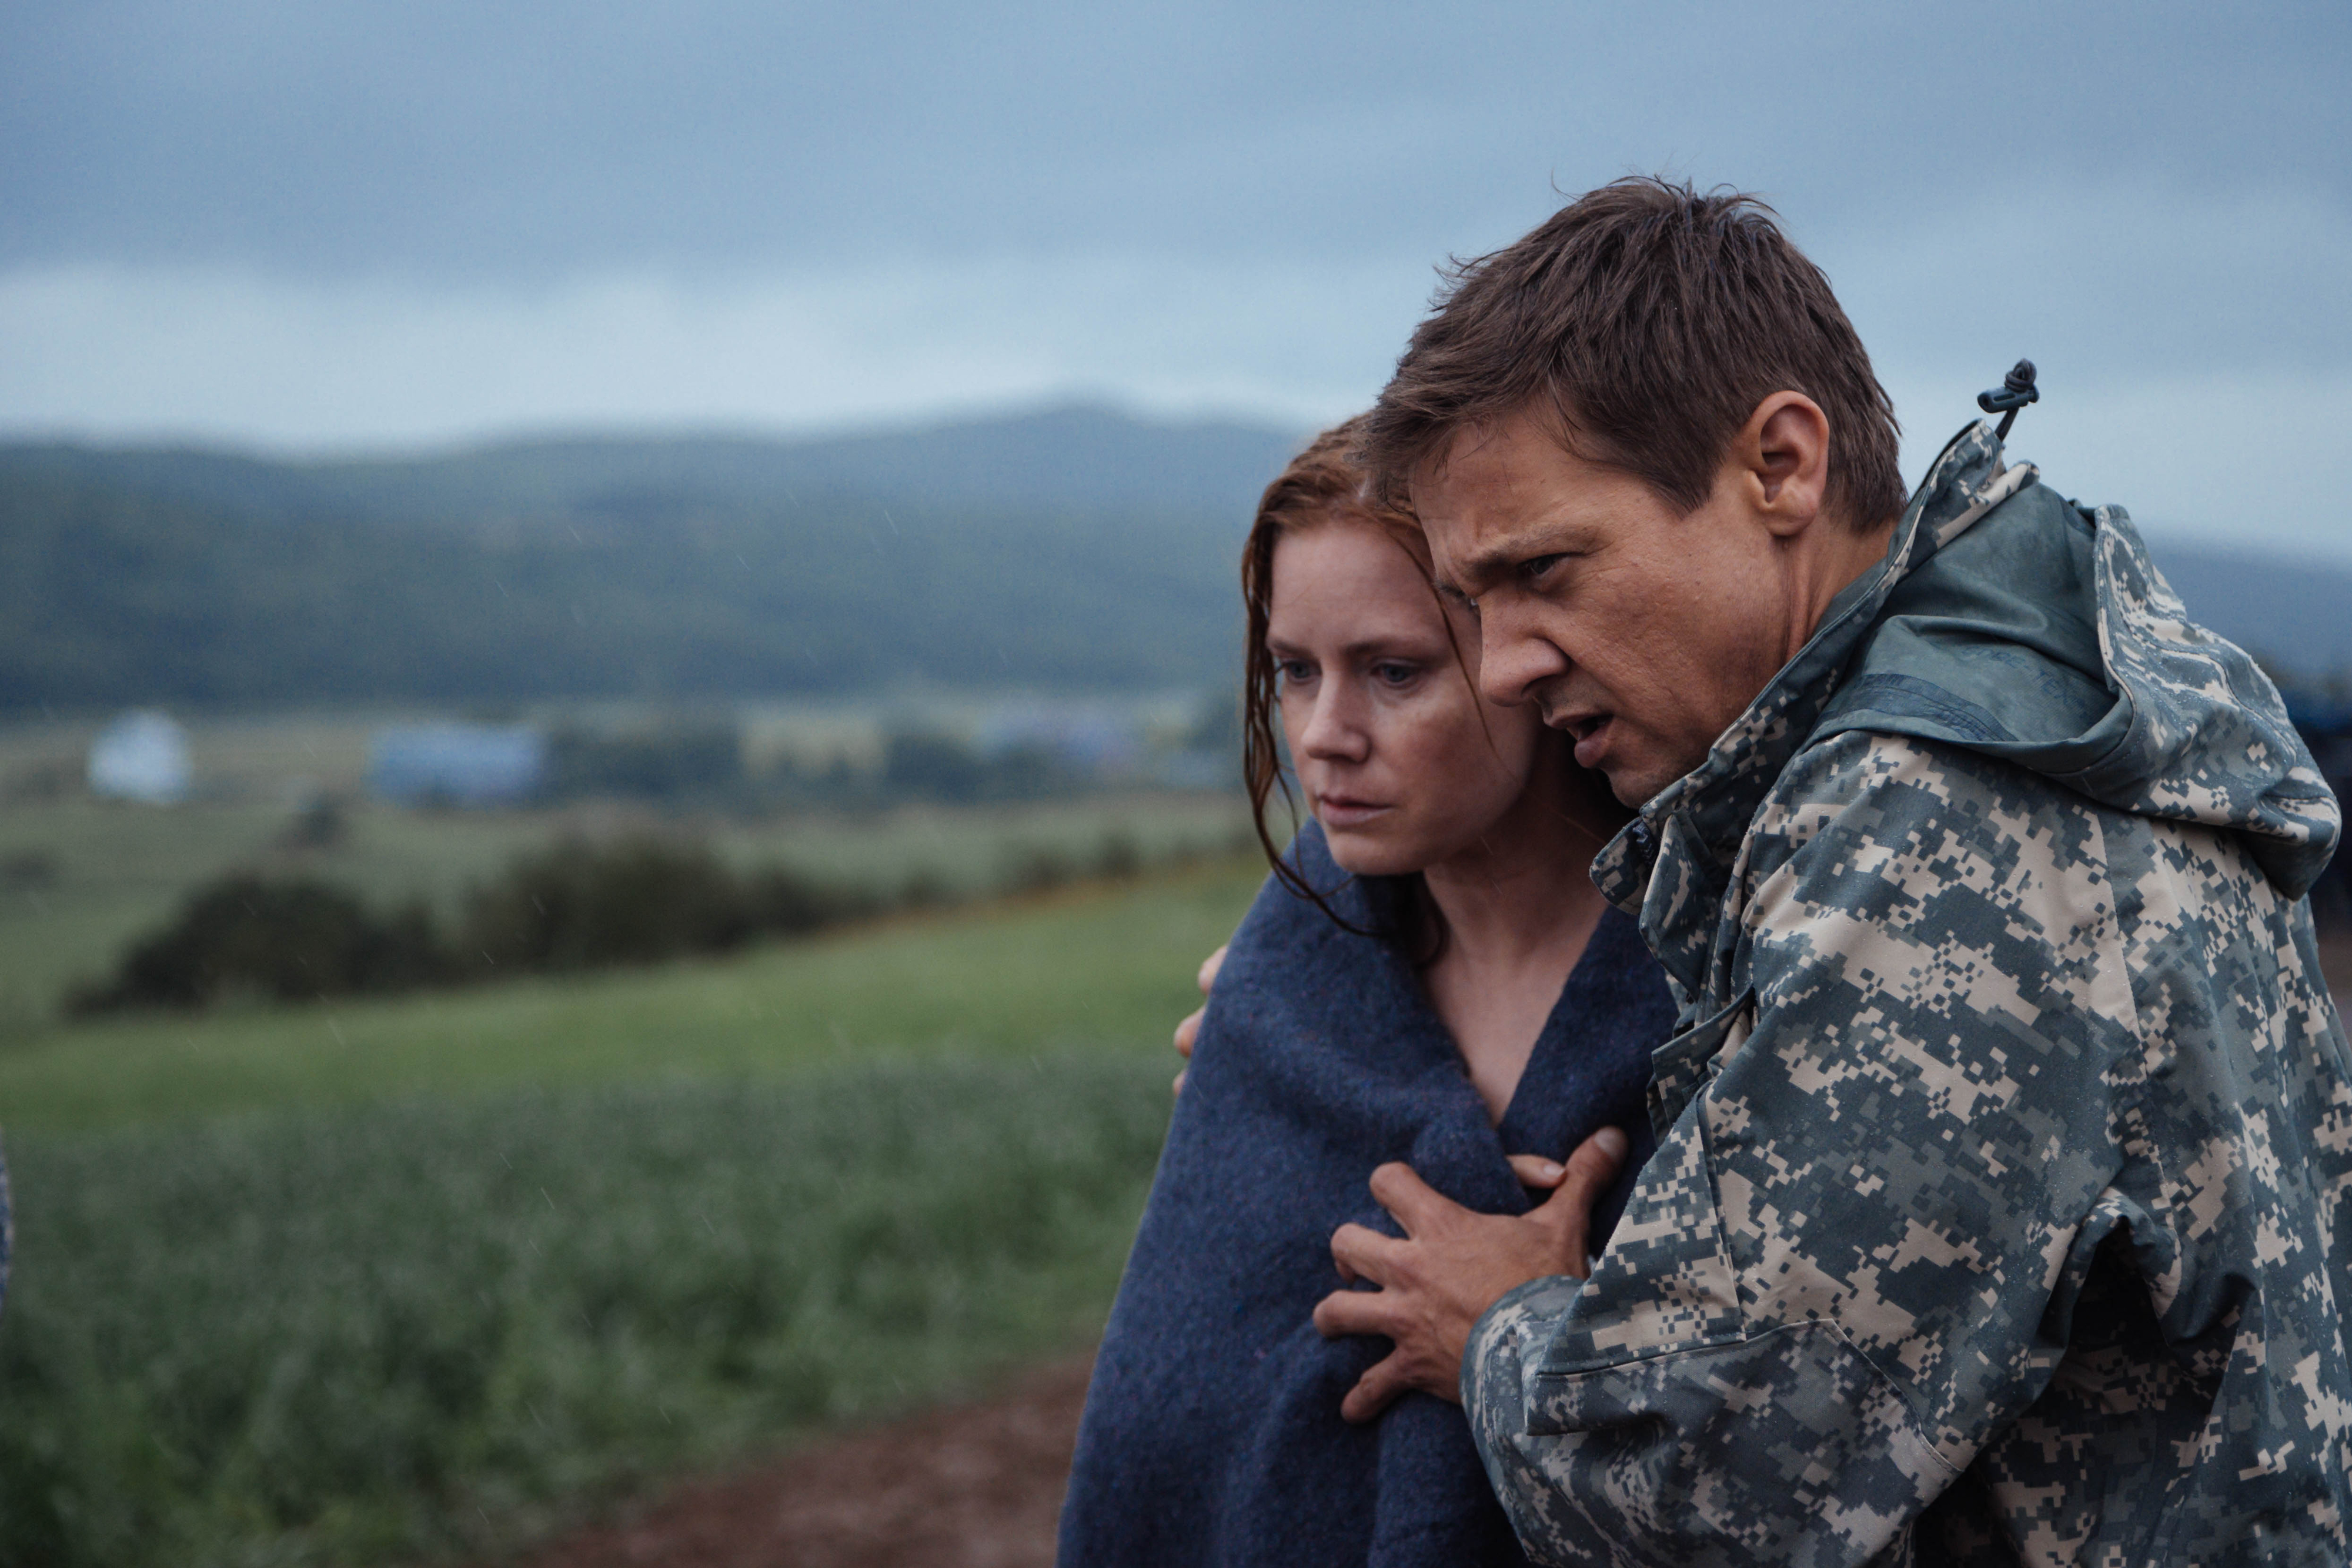 arrival (movie), movie, arrival, amy adams, jeremy renner